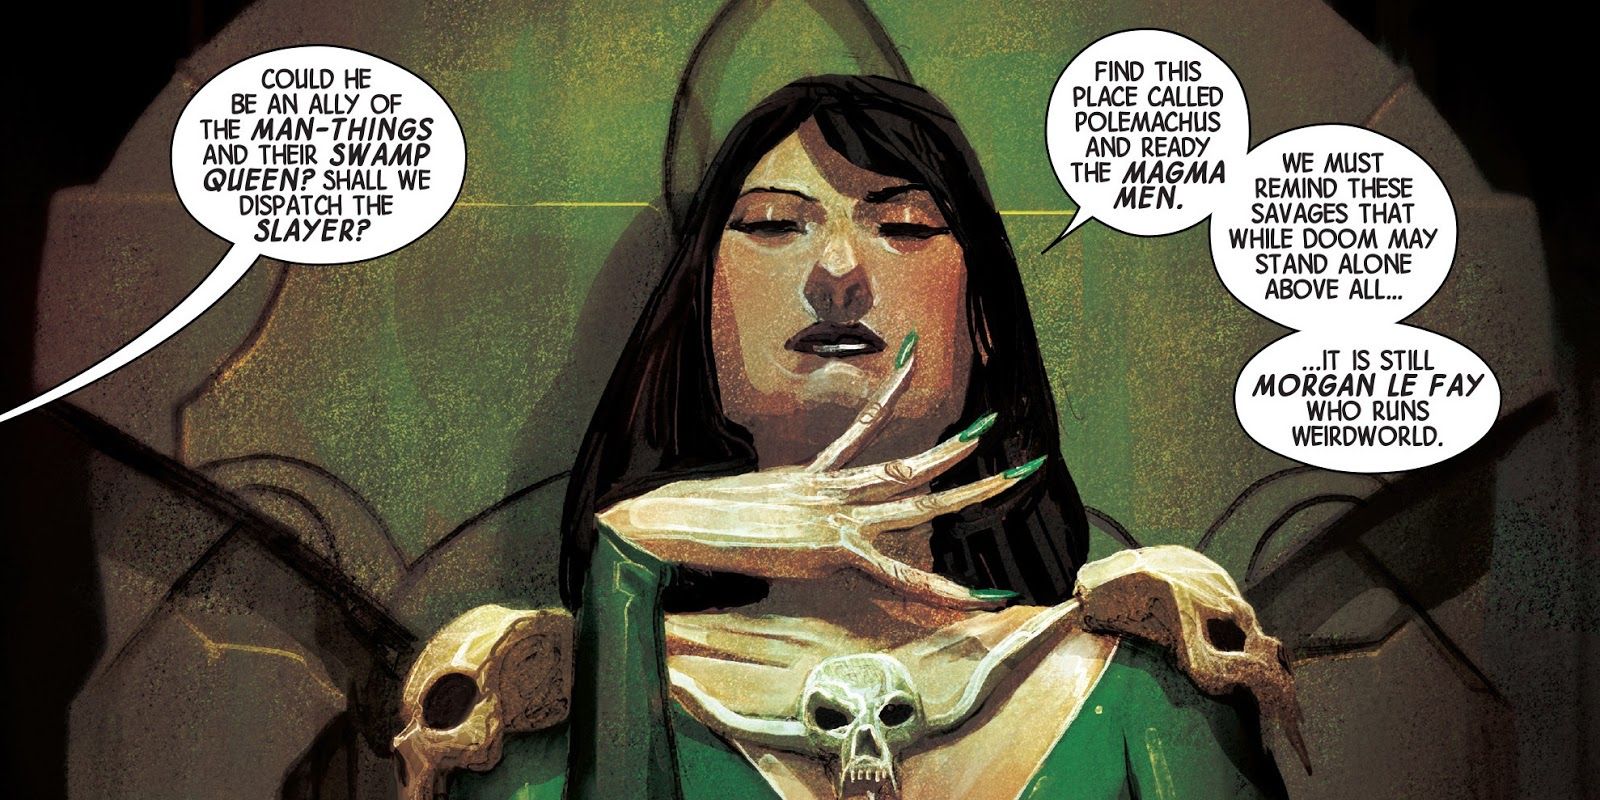 Morgan Le Fay sits and poses with her hand in Marvel Comics.